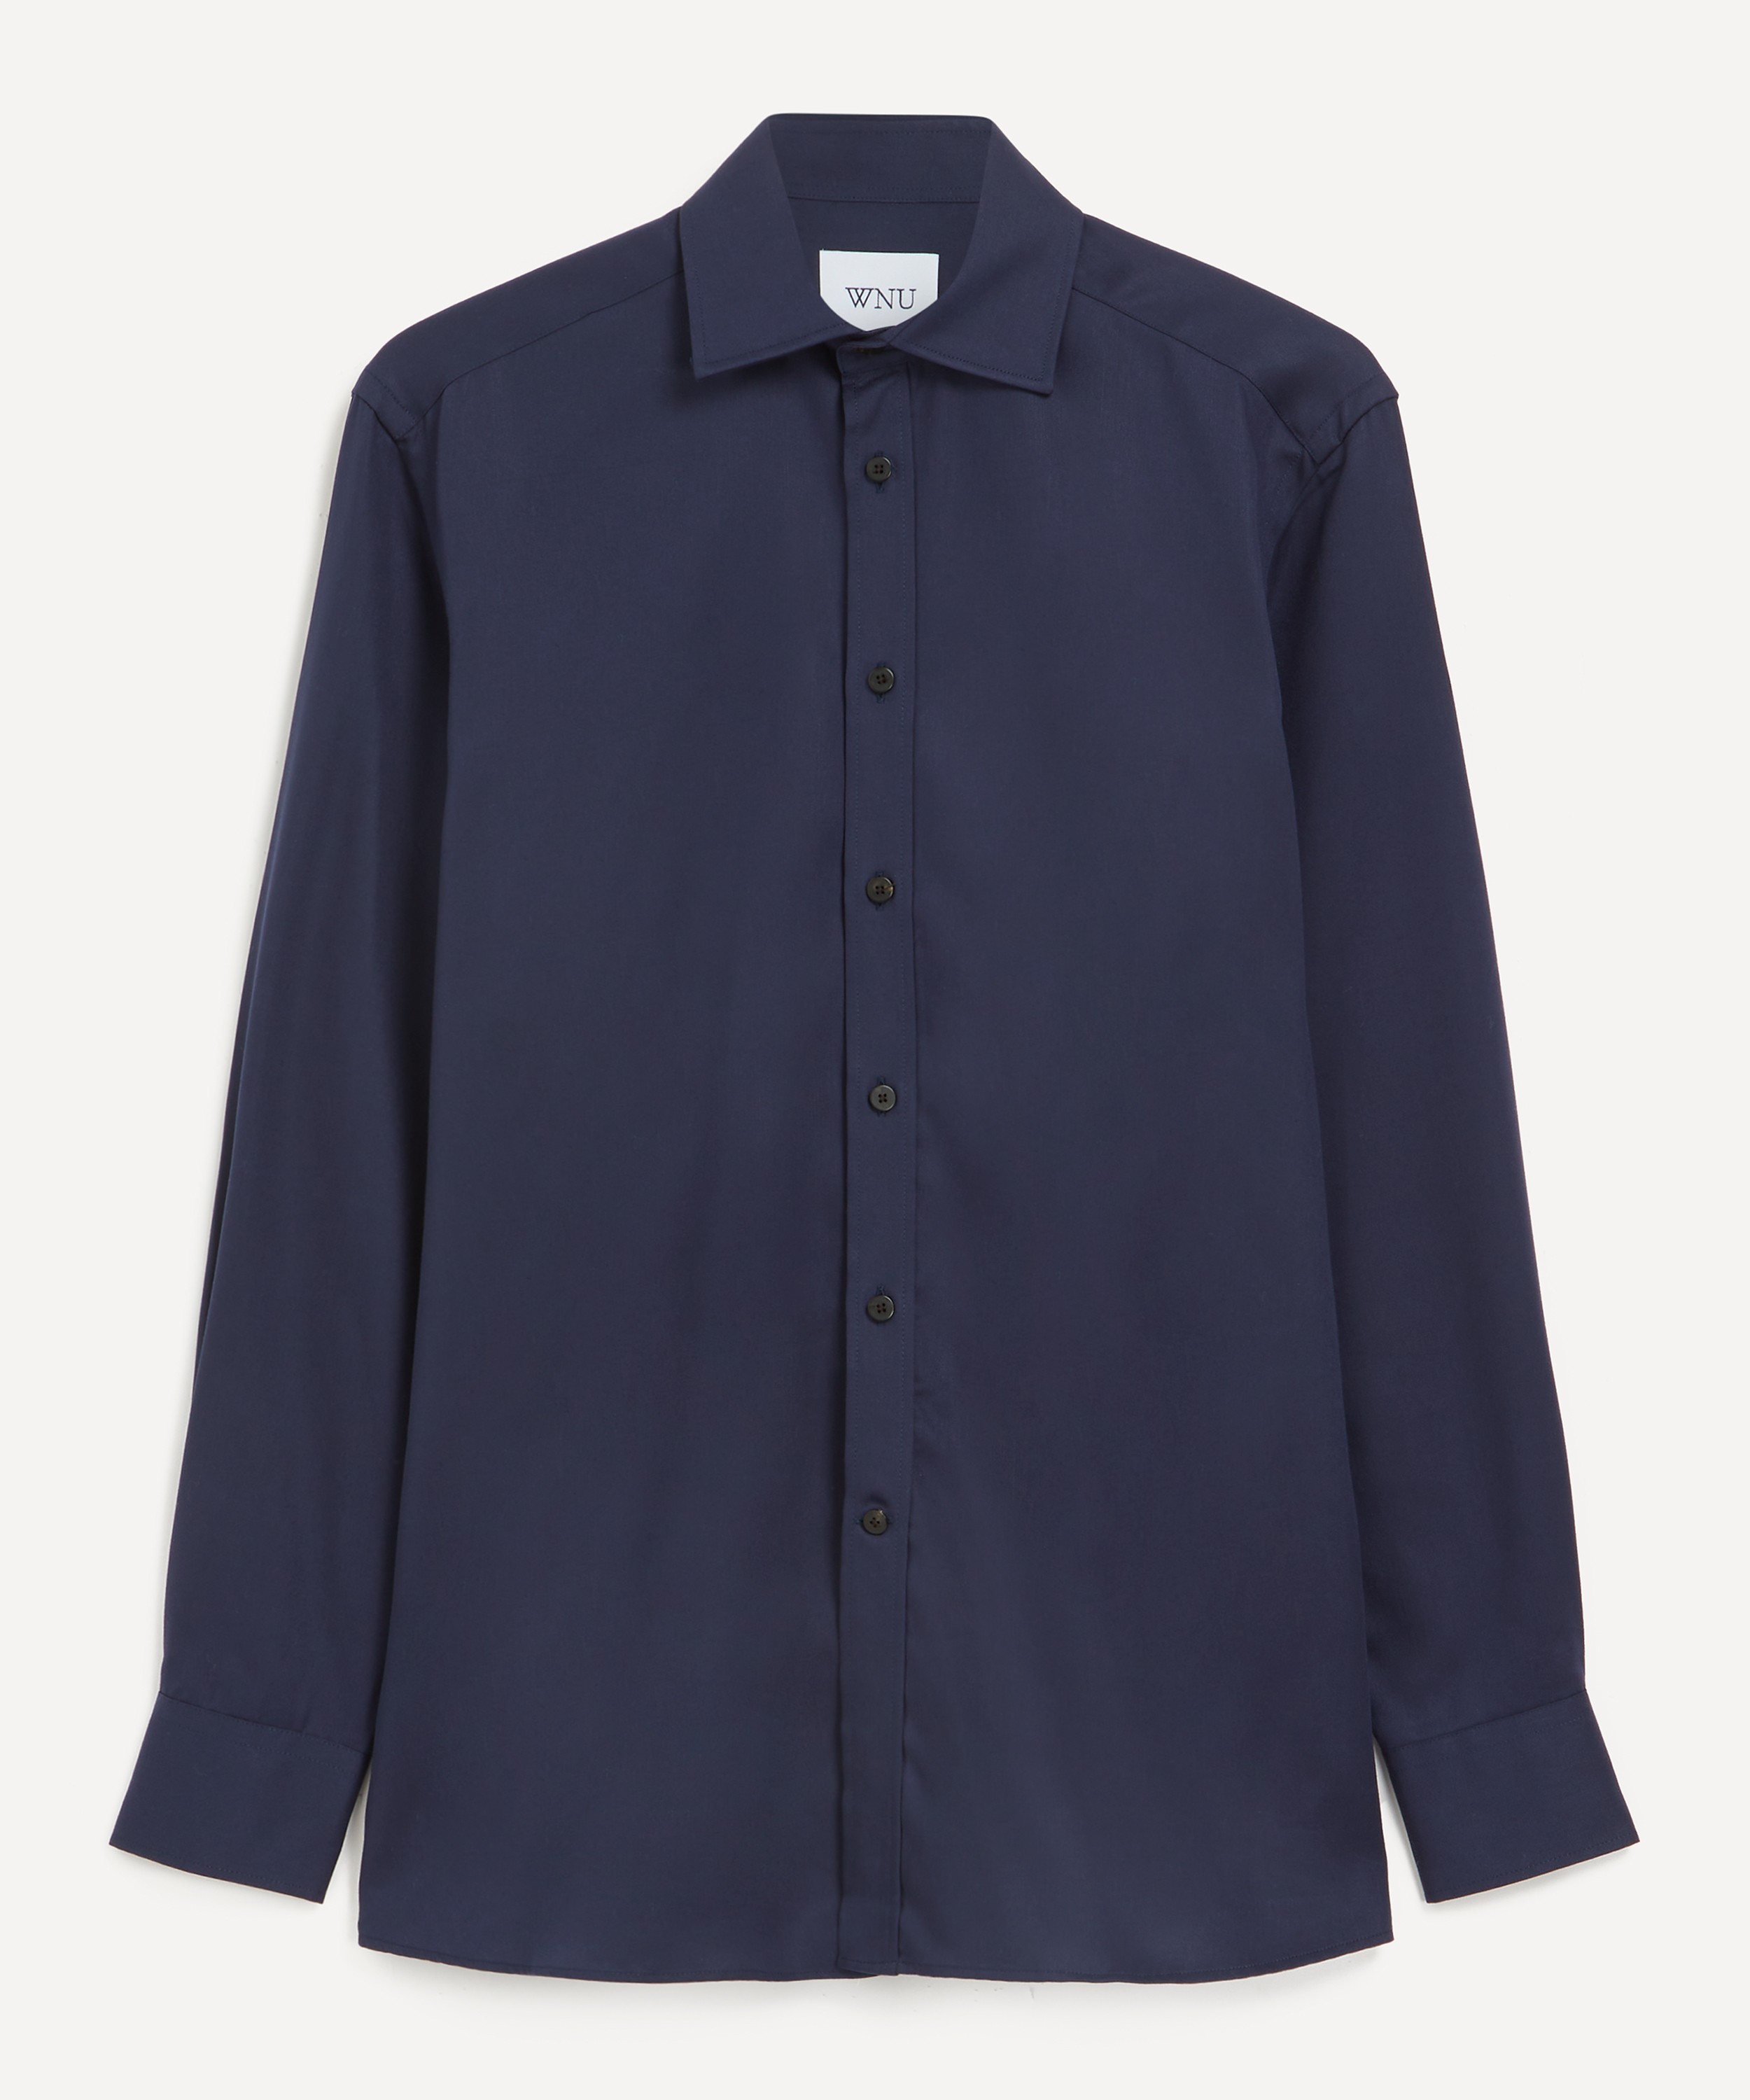 With Nothing Underneath - The Boyfriend Tencel Shirt